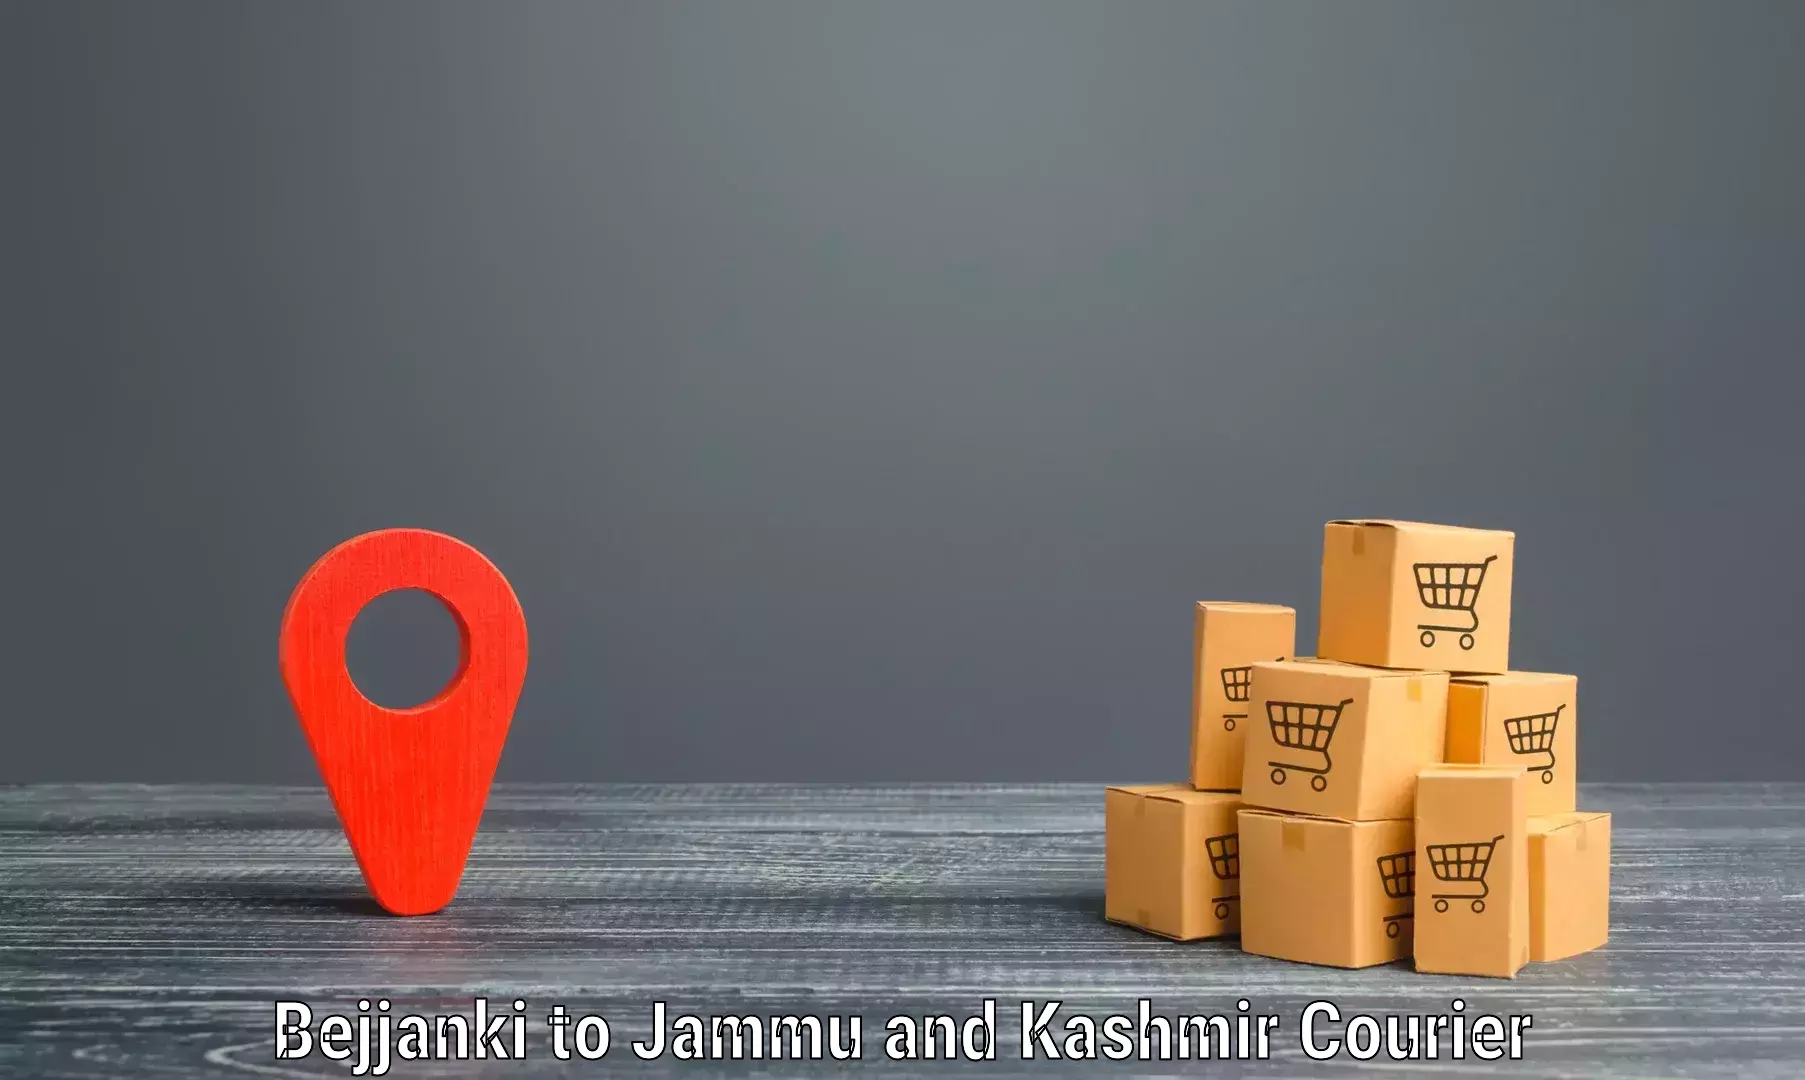 Efficient courier operations Bejjanki to Jammu and Kashmir